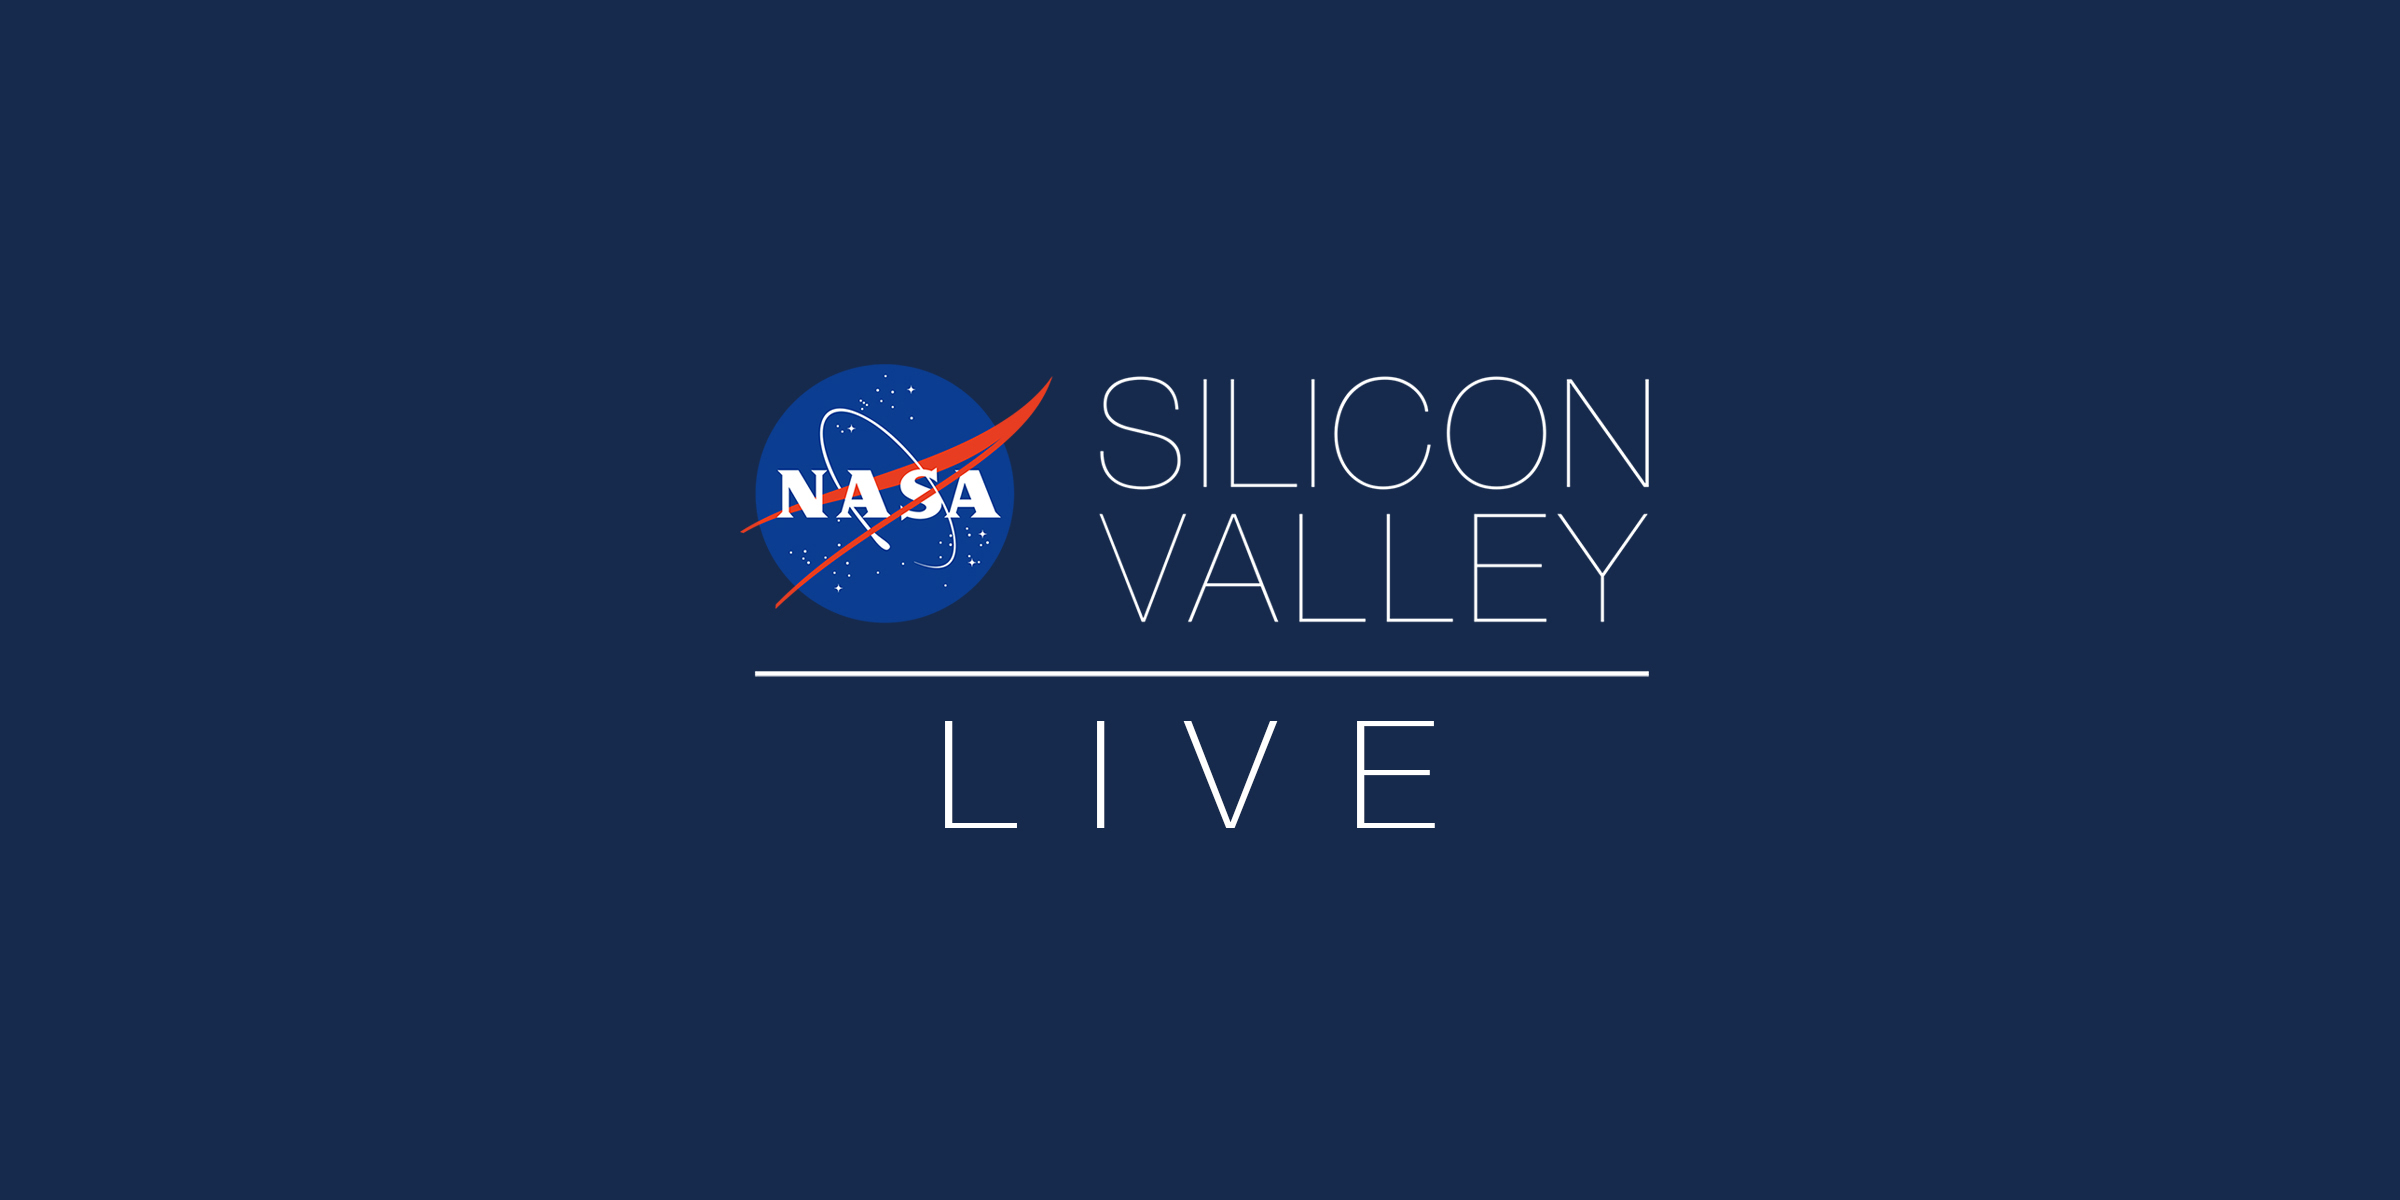 NASA in Silicon Valley Live - Searching for Life Beyond Earth